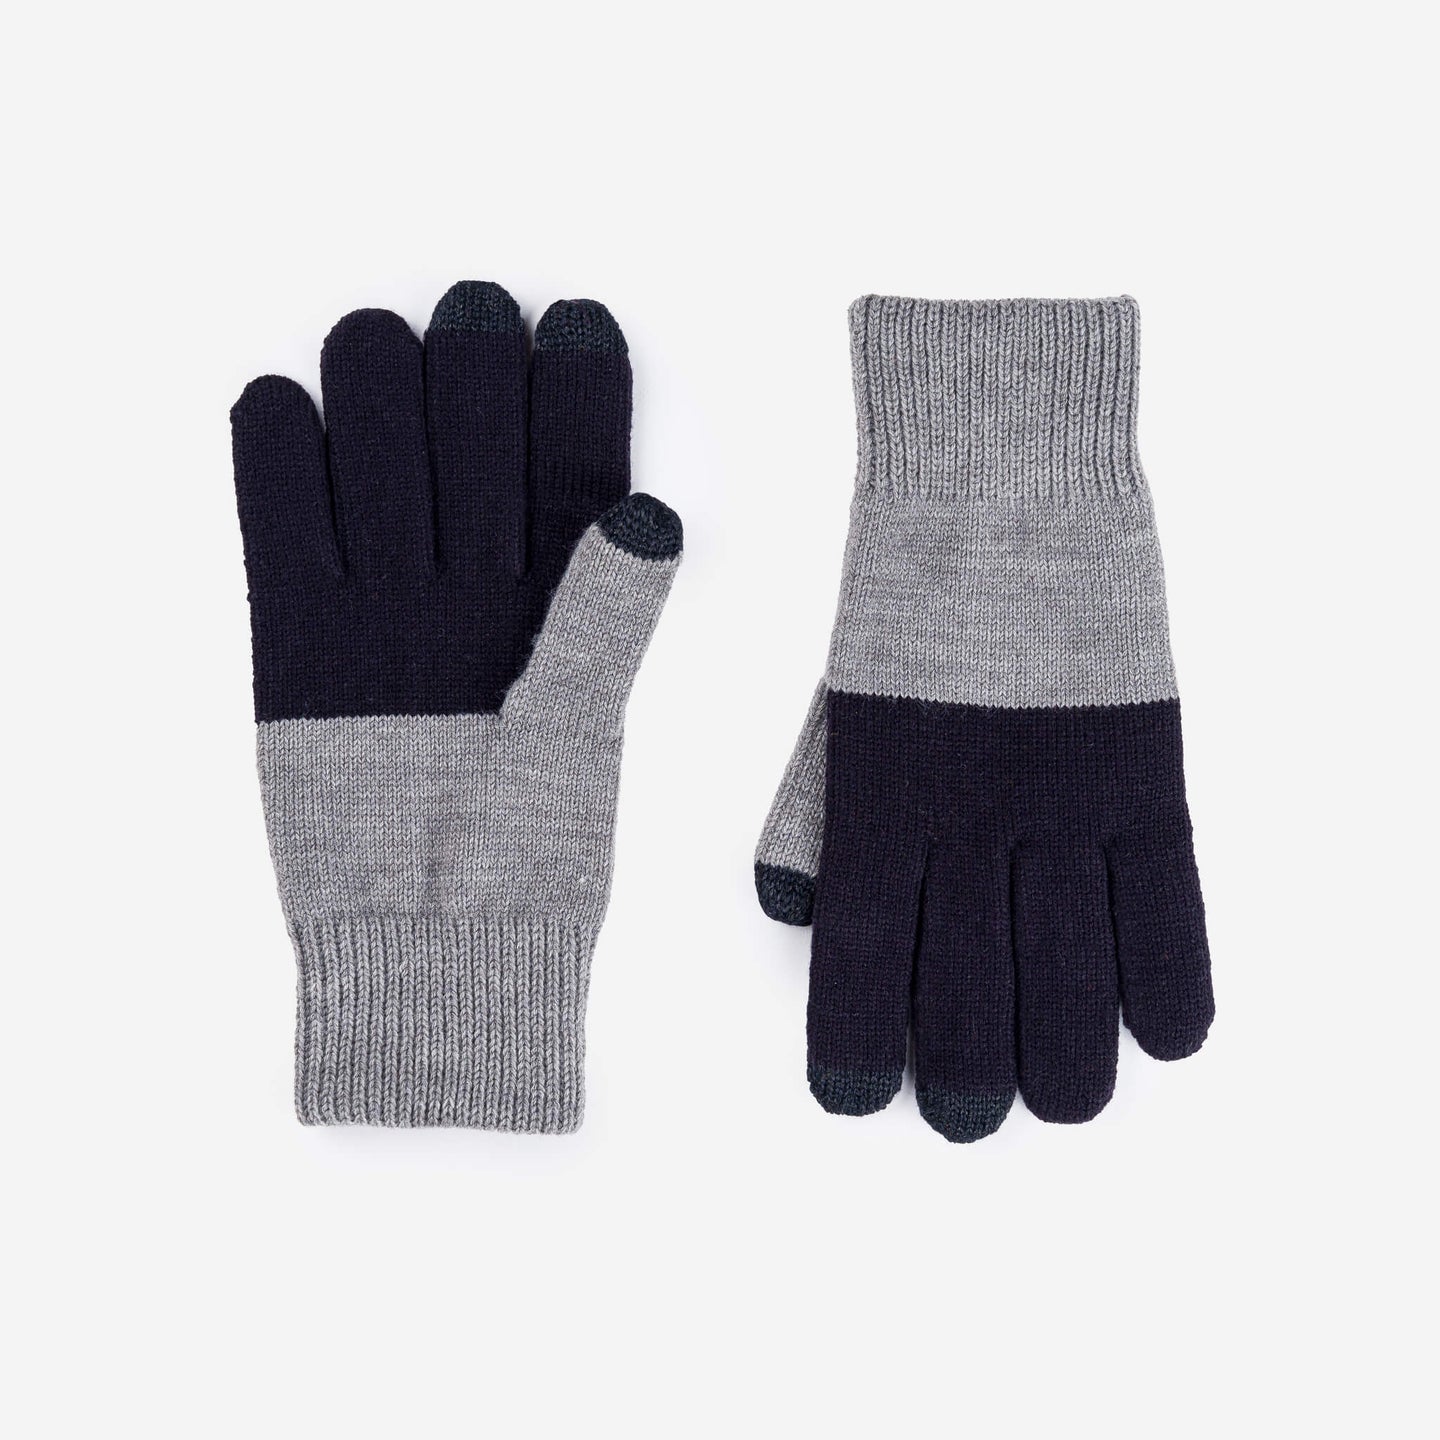 Mens Touchscreen Knit Gloves Extra Large Hands Stretch